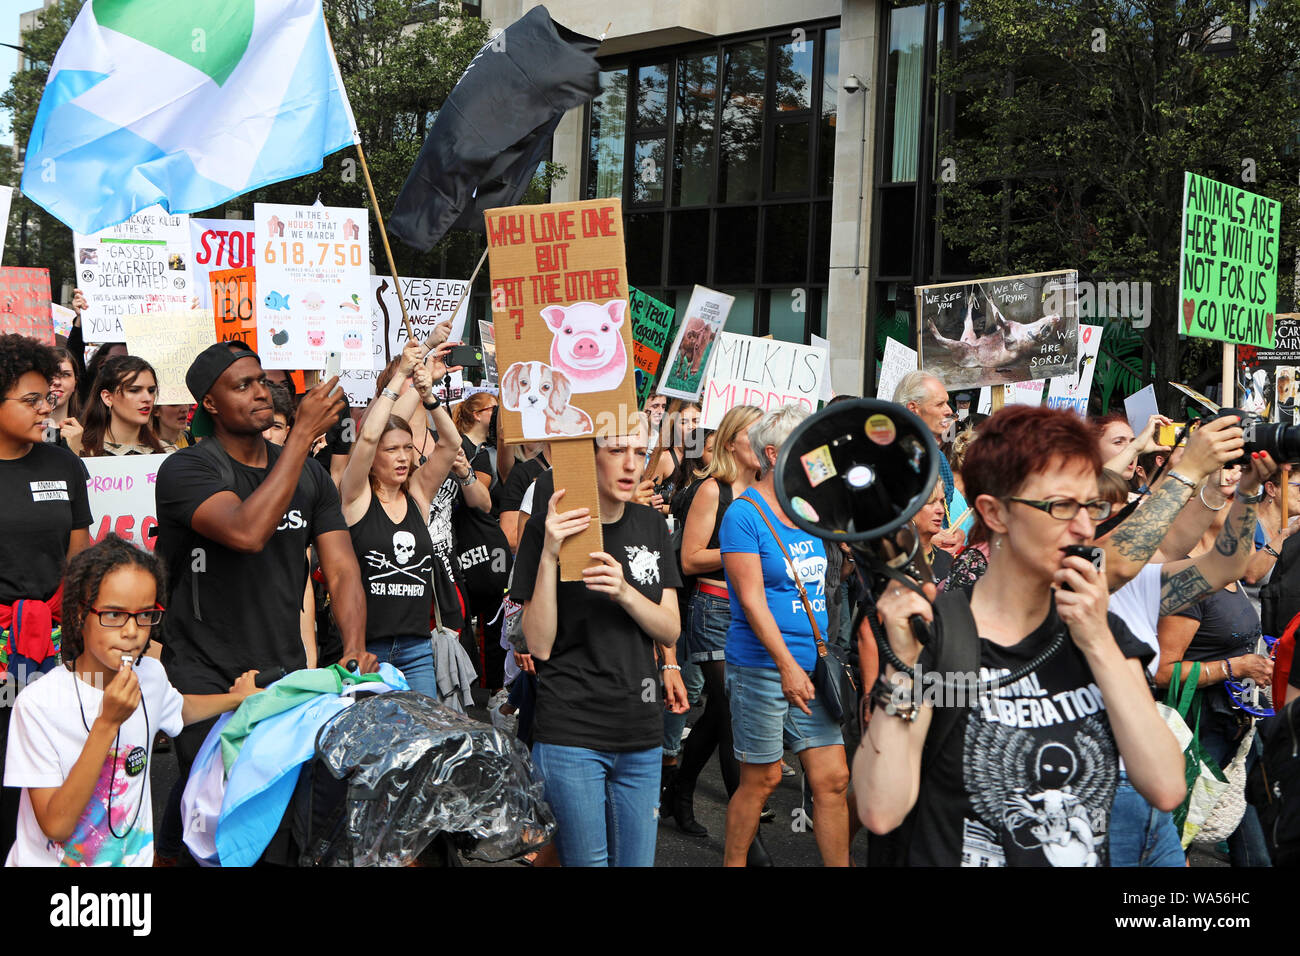 London, UK. 17th August 2019. Protestors at the Official Animal Rights March marching through London is an annual vegan march protesting the treatment of animals and organised by Surge. Credit: Paul Brown/Alamy Live News Stock Photo